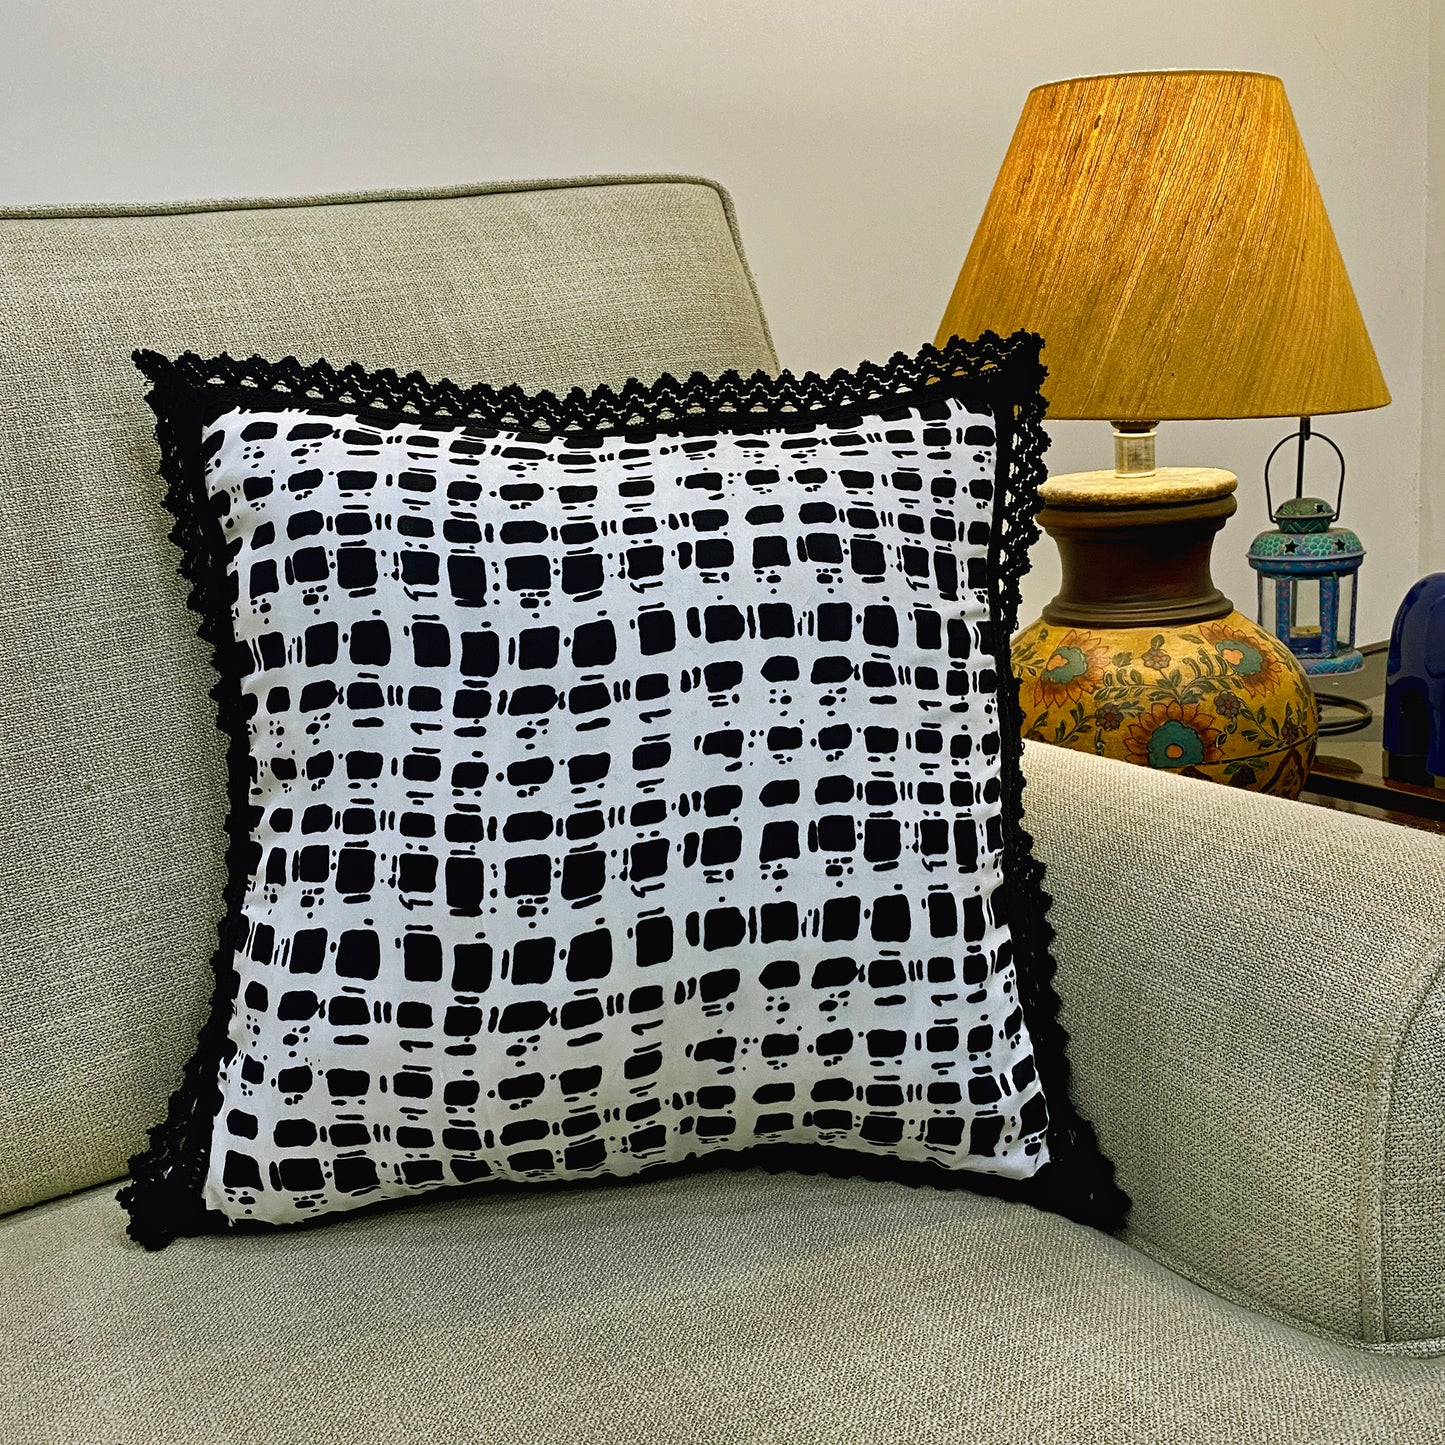 Black & White Cushion Cover With Lacework